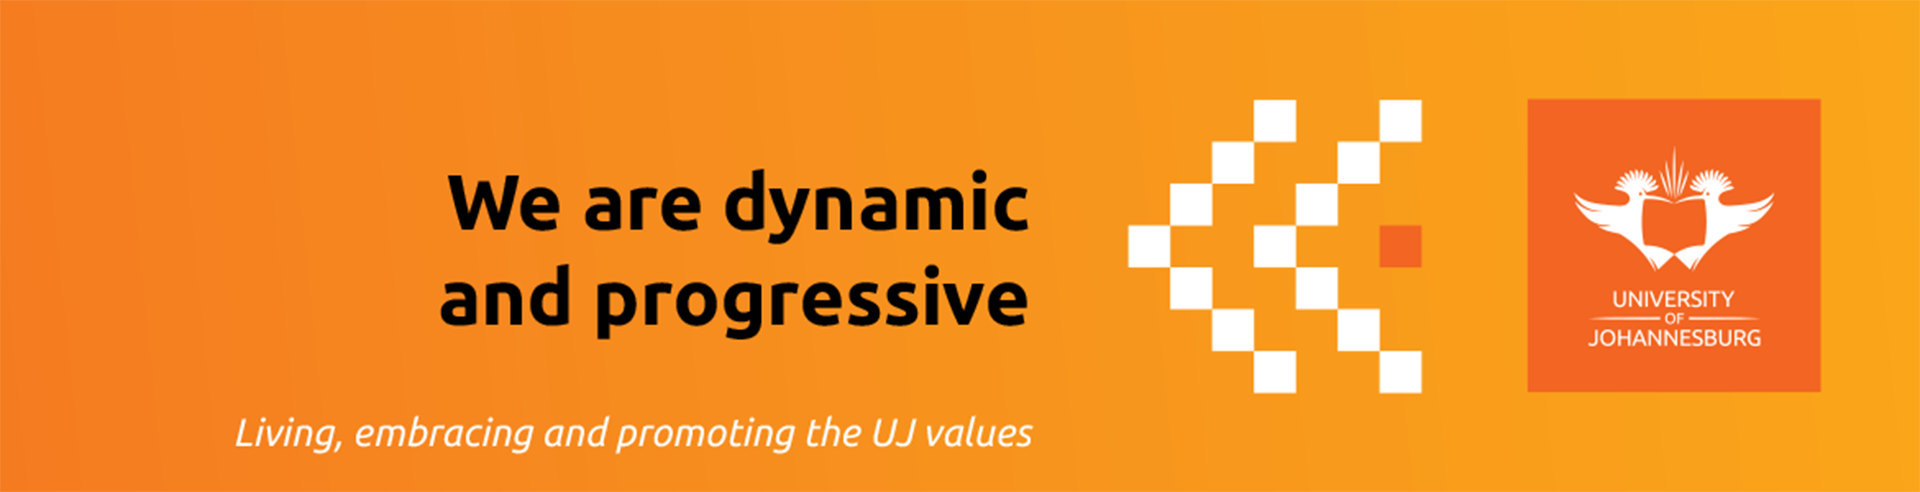 Uj Values Expressions Posters 2020 Ulink 1170x300mm 36